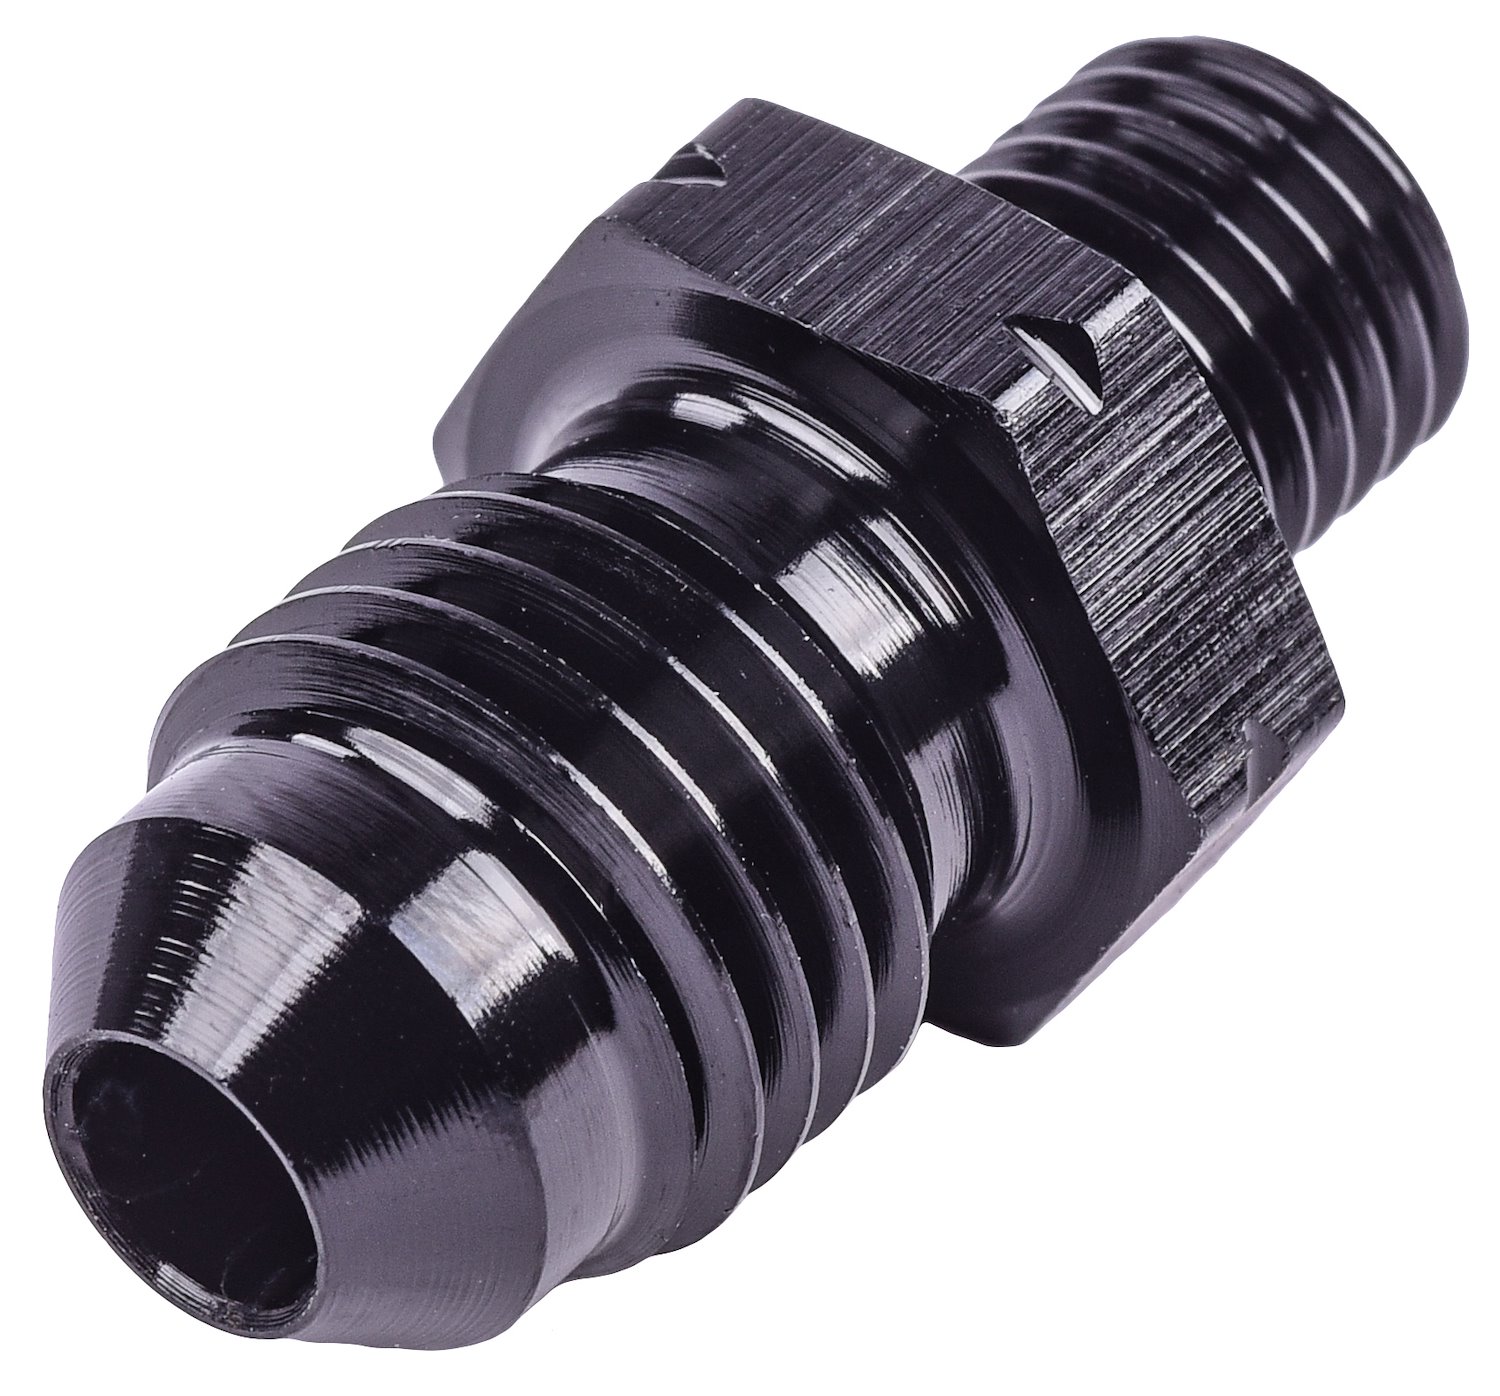 AN to Metric Adapter Fitting [-4 AN Male to 8mm x 1.0 Male, Black]